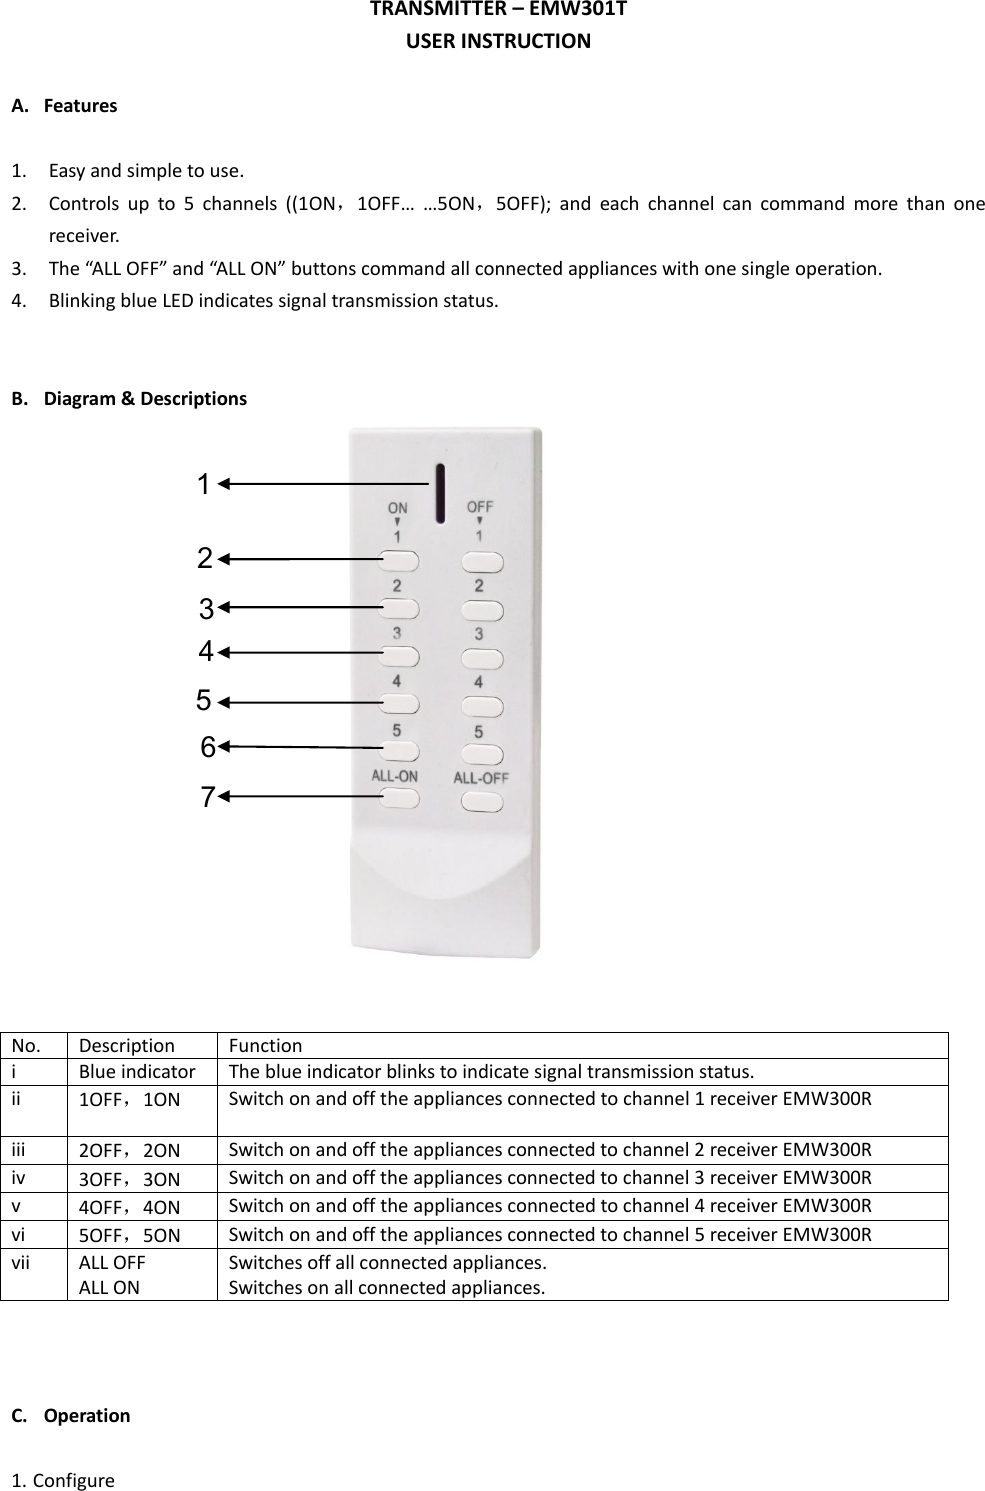 TRANSMITTER – EMW301T USER INSTRUCTION  A. Features  1. Easy and simple to use. 2. Controls  up  to  5  channels  ((1ON，1OFF…  …5ON，5OFF);  and  each  channel  can  command  more  than  one receiver. 3. The “ALL OFF” and “ALL ON” buttons command all connected appliances with one single operation. 4. Blinking blue LED indicates signal transmission status.   B. Diagram &amp; Descriptions    No. Description Function i Blue indicator The blue indicator blinks to indicate signal transmission status. ii 1OFF，1ON Switch on and off the appliances connected to channel 1 receiver EMW300R iii 2OFF，2ON Switch on and off the appliances connected to channel 2 receiver EMW300R iv 3OFF，3ON Switch on and off the appliances connected to channel 3 receiver EMW300R v 4OFF，4ON Switch on and off the appliances connected to channel 4 receiver EMW300R vi 5OFF，5ON Switch on and off the appliances connected to channel 5 receiver EMW300R vii ALL OFF ALL ON Switches off all connected appliances. Switches on all connected appliances.    C. Operation  1. Configure 1 2 3 4 5 6 7 